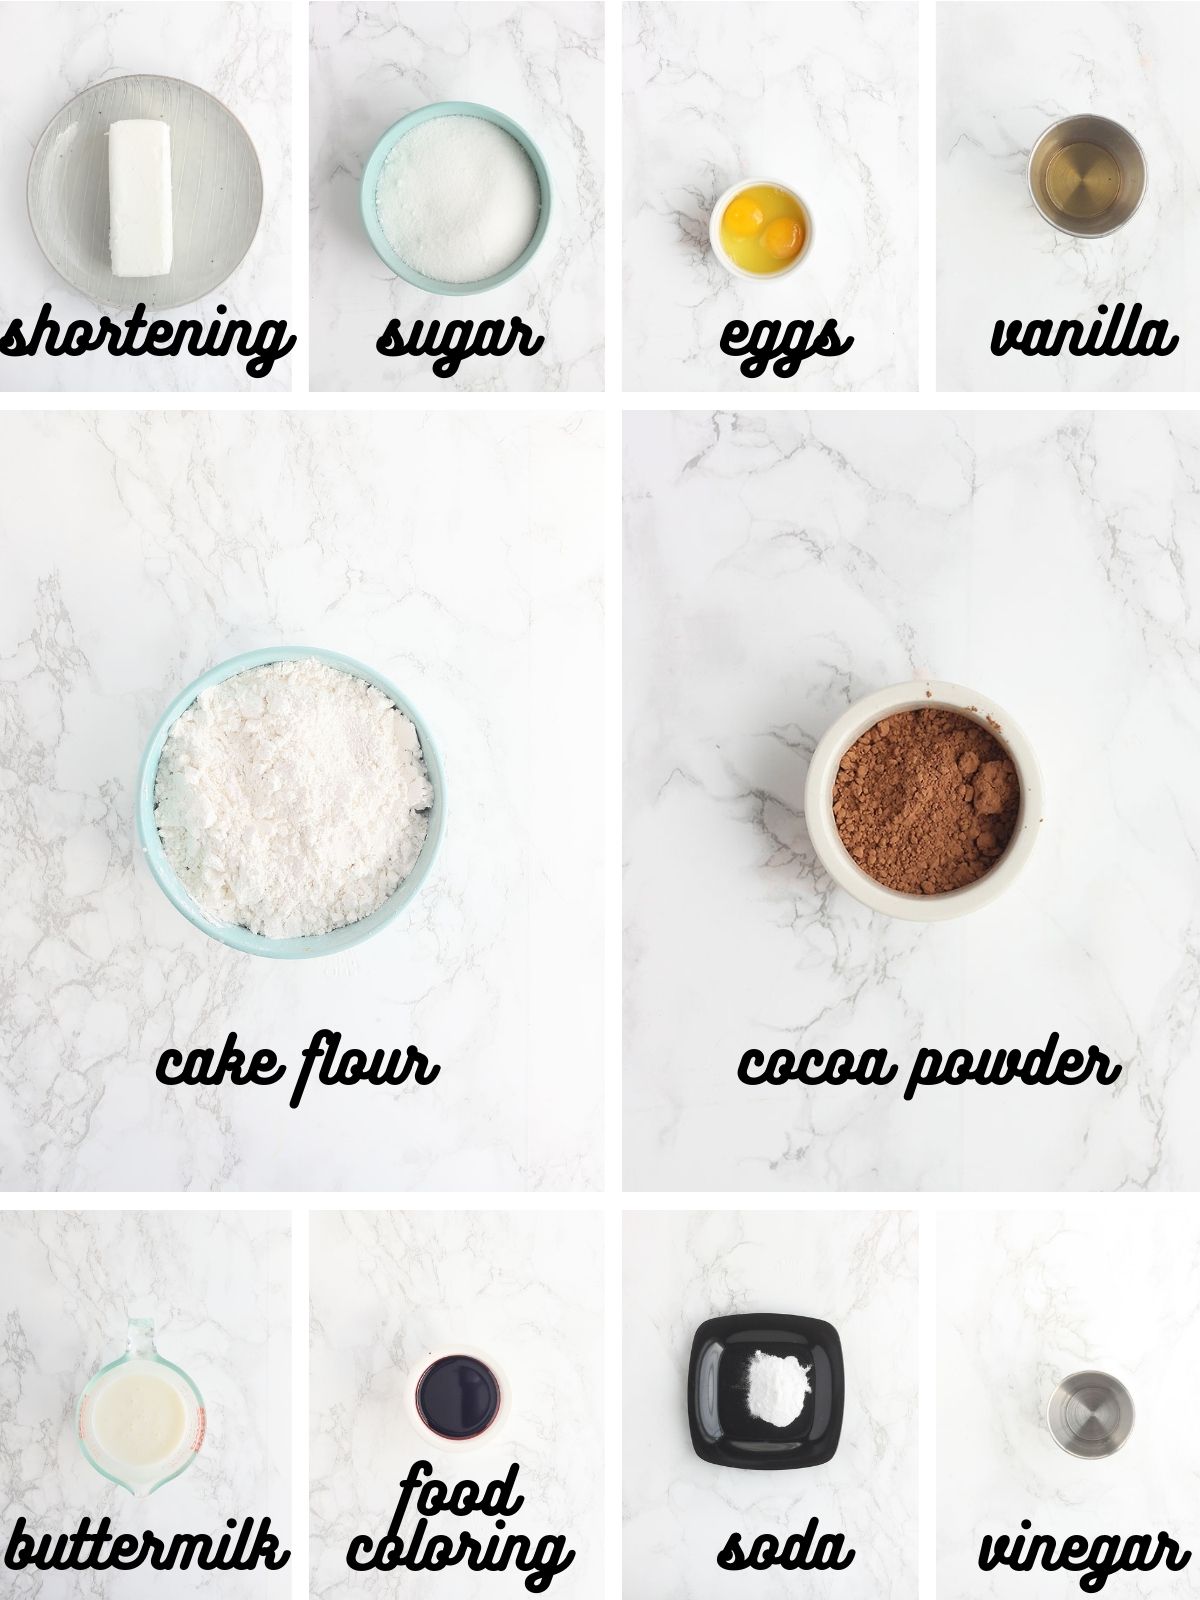 collage of red velvet cake ingredients which include shortening, sugar, eggs, vanilla, cake flour, cocoa powder, buttermilk, red food coloring, baking soda and white vinegar